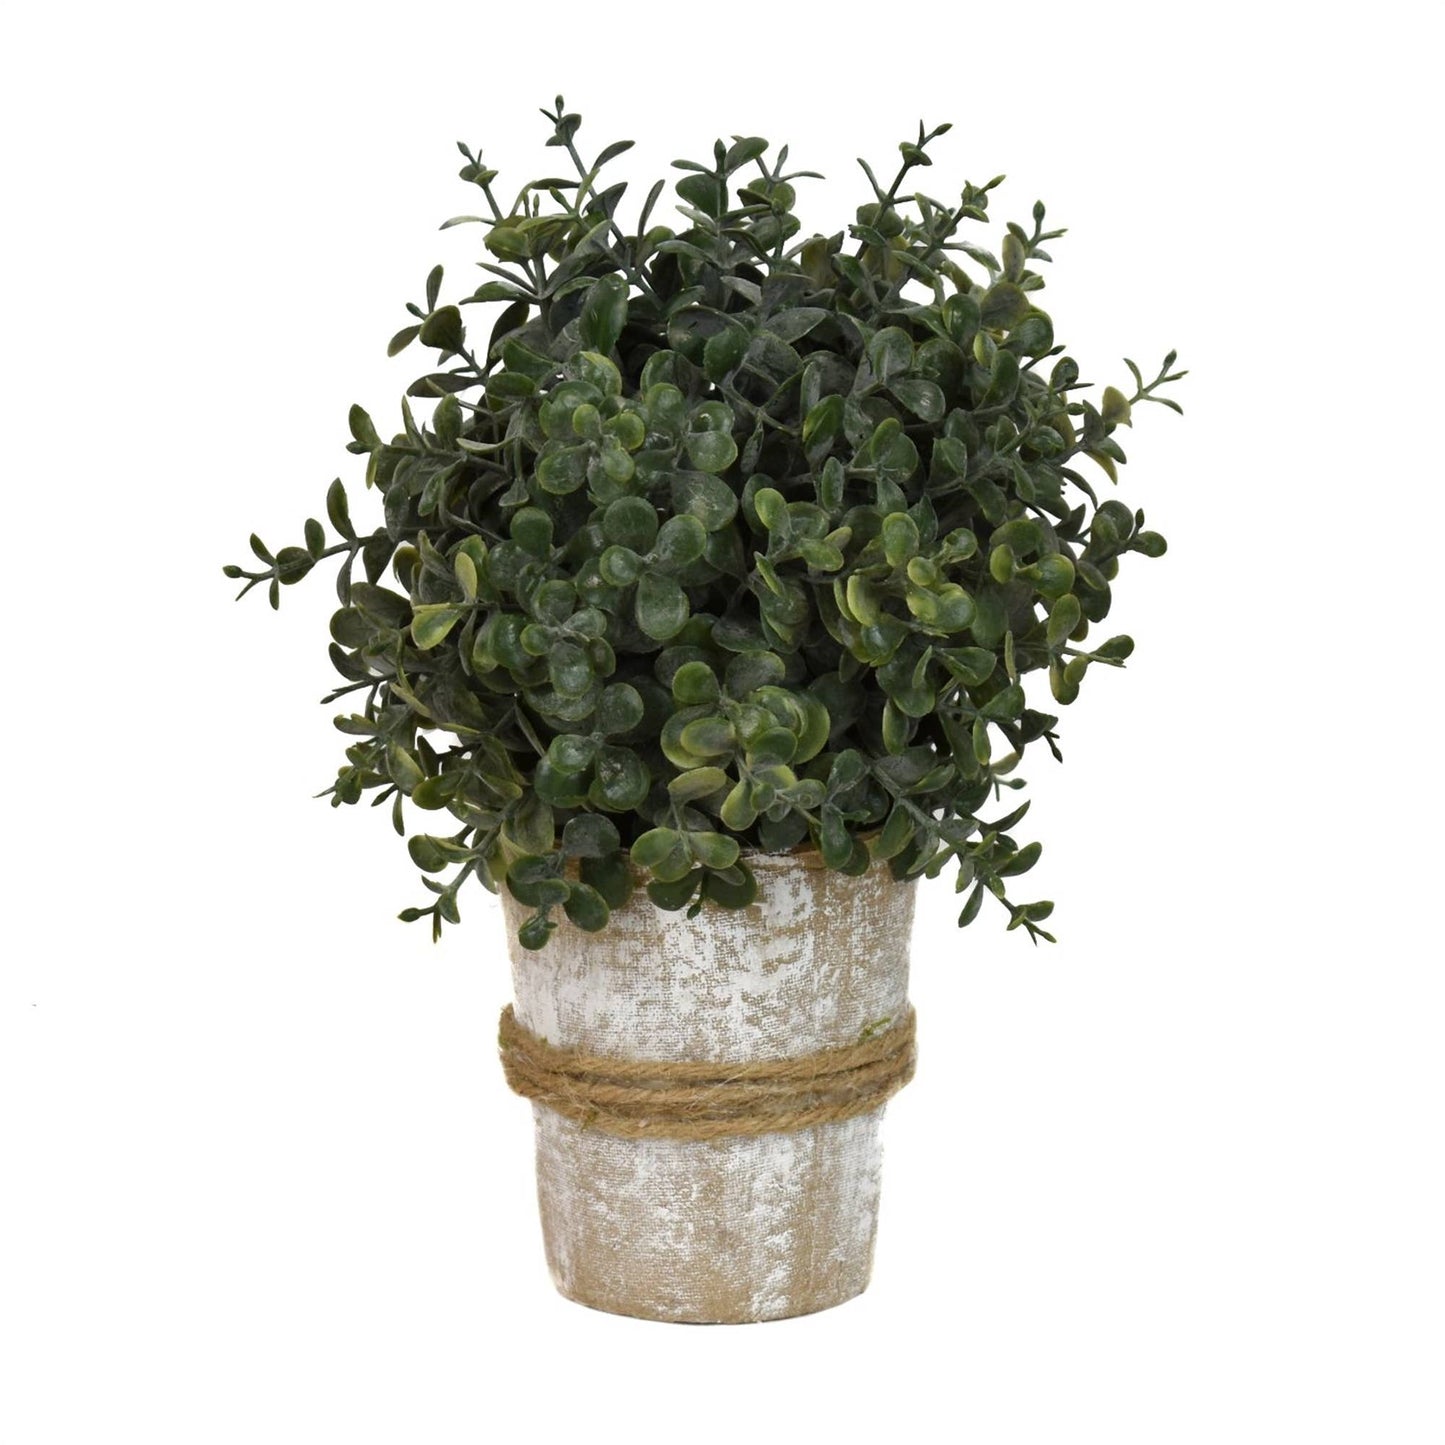 8.5” Tea Leaf Ball Topiary in Handcrafted Pot